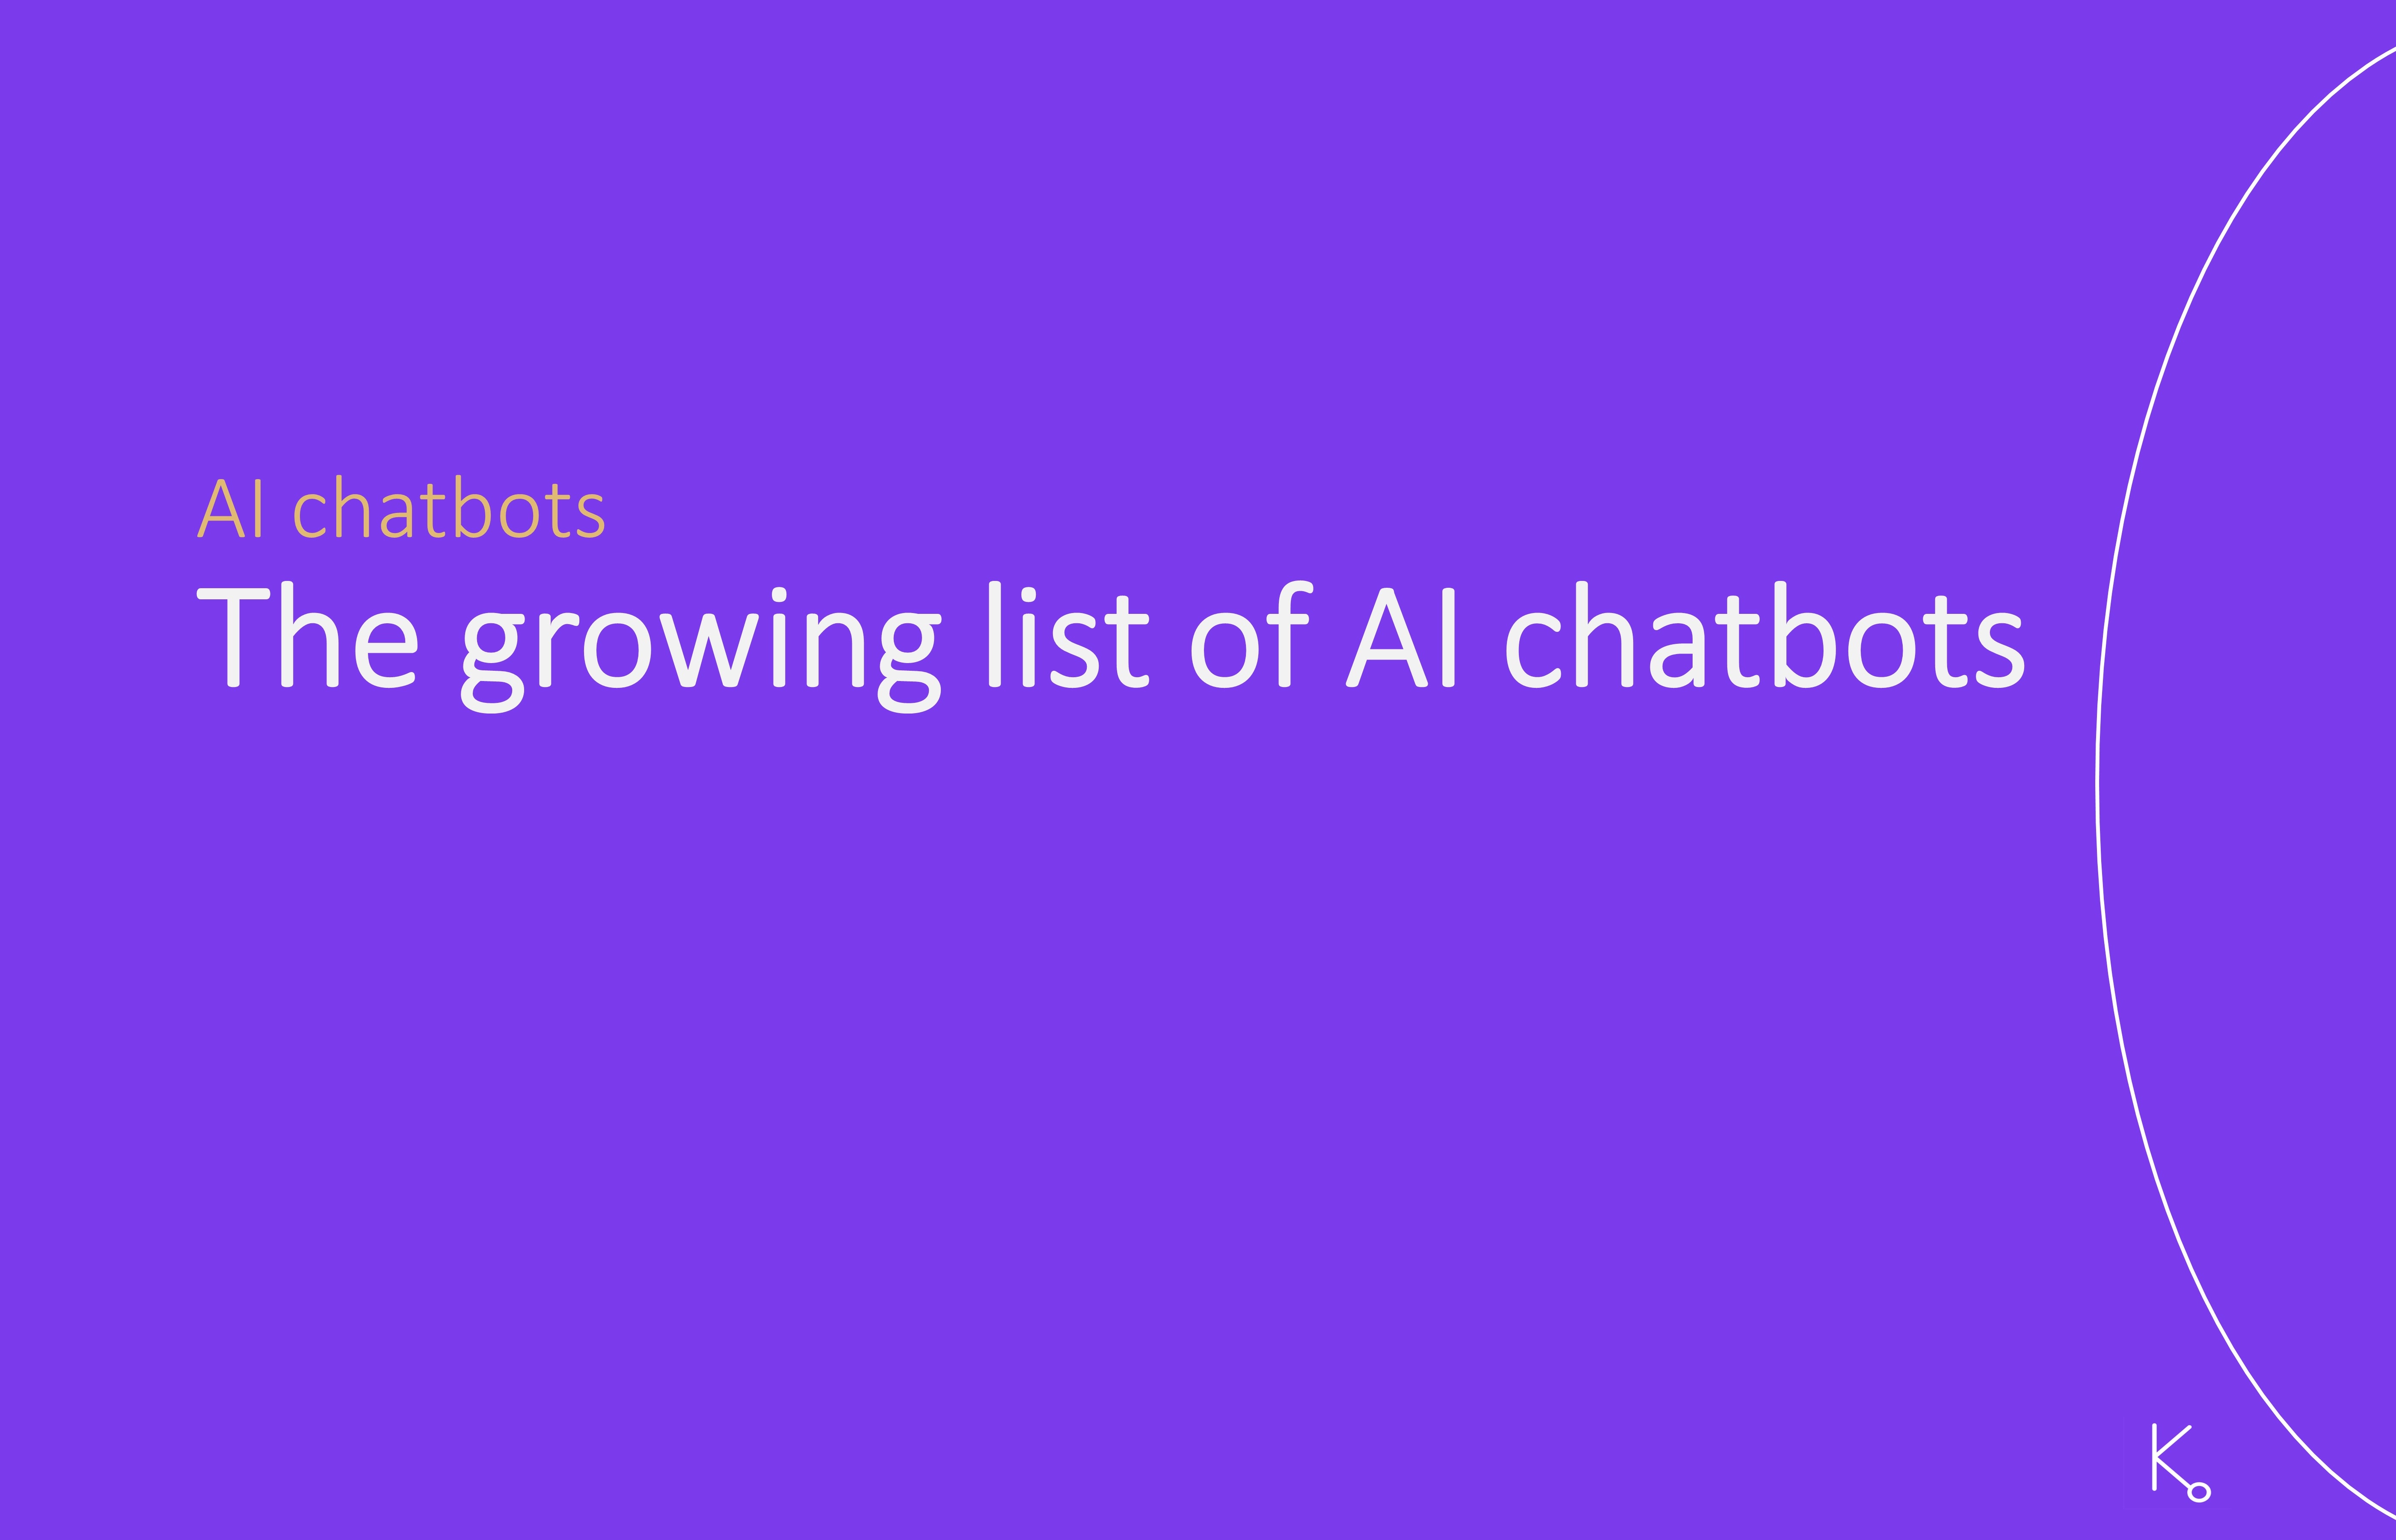 The growing list of AI chatbots